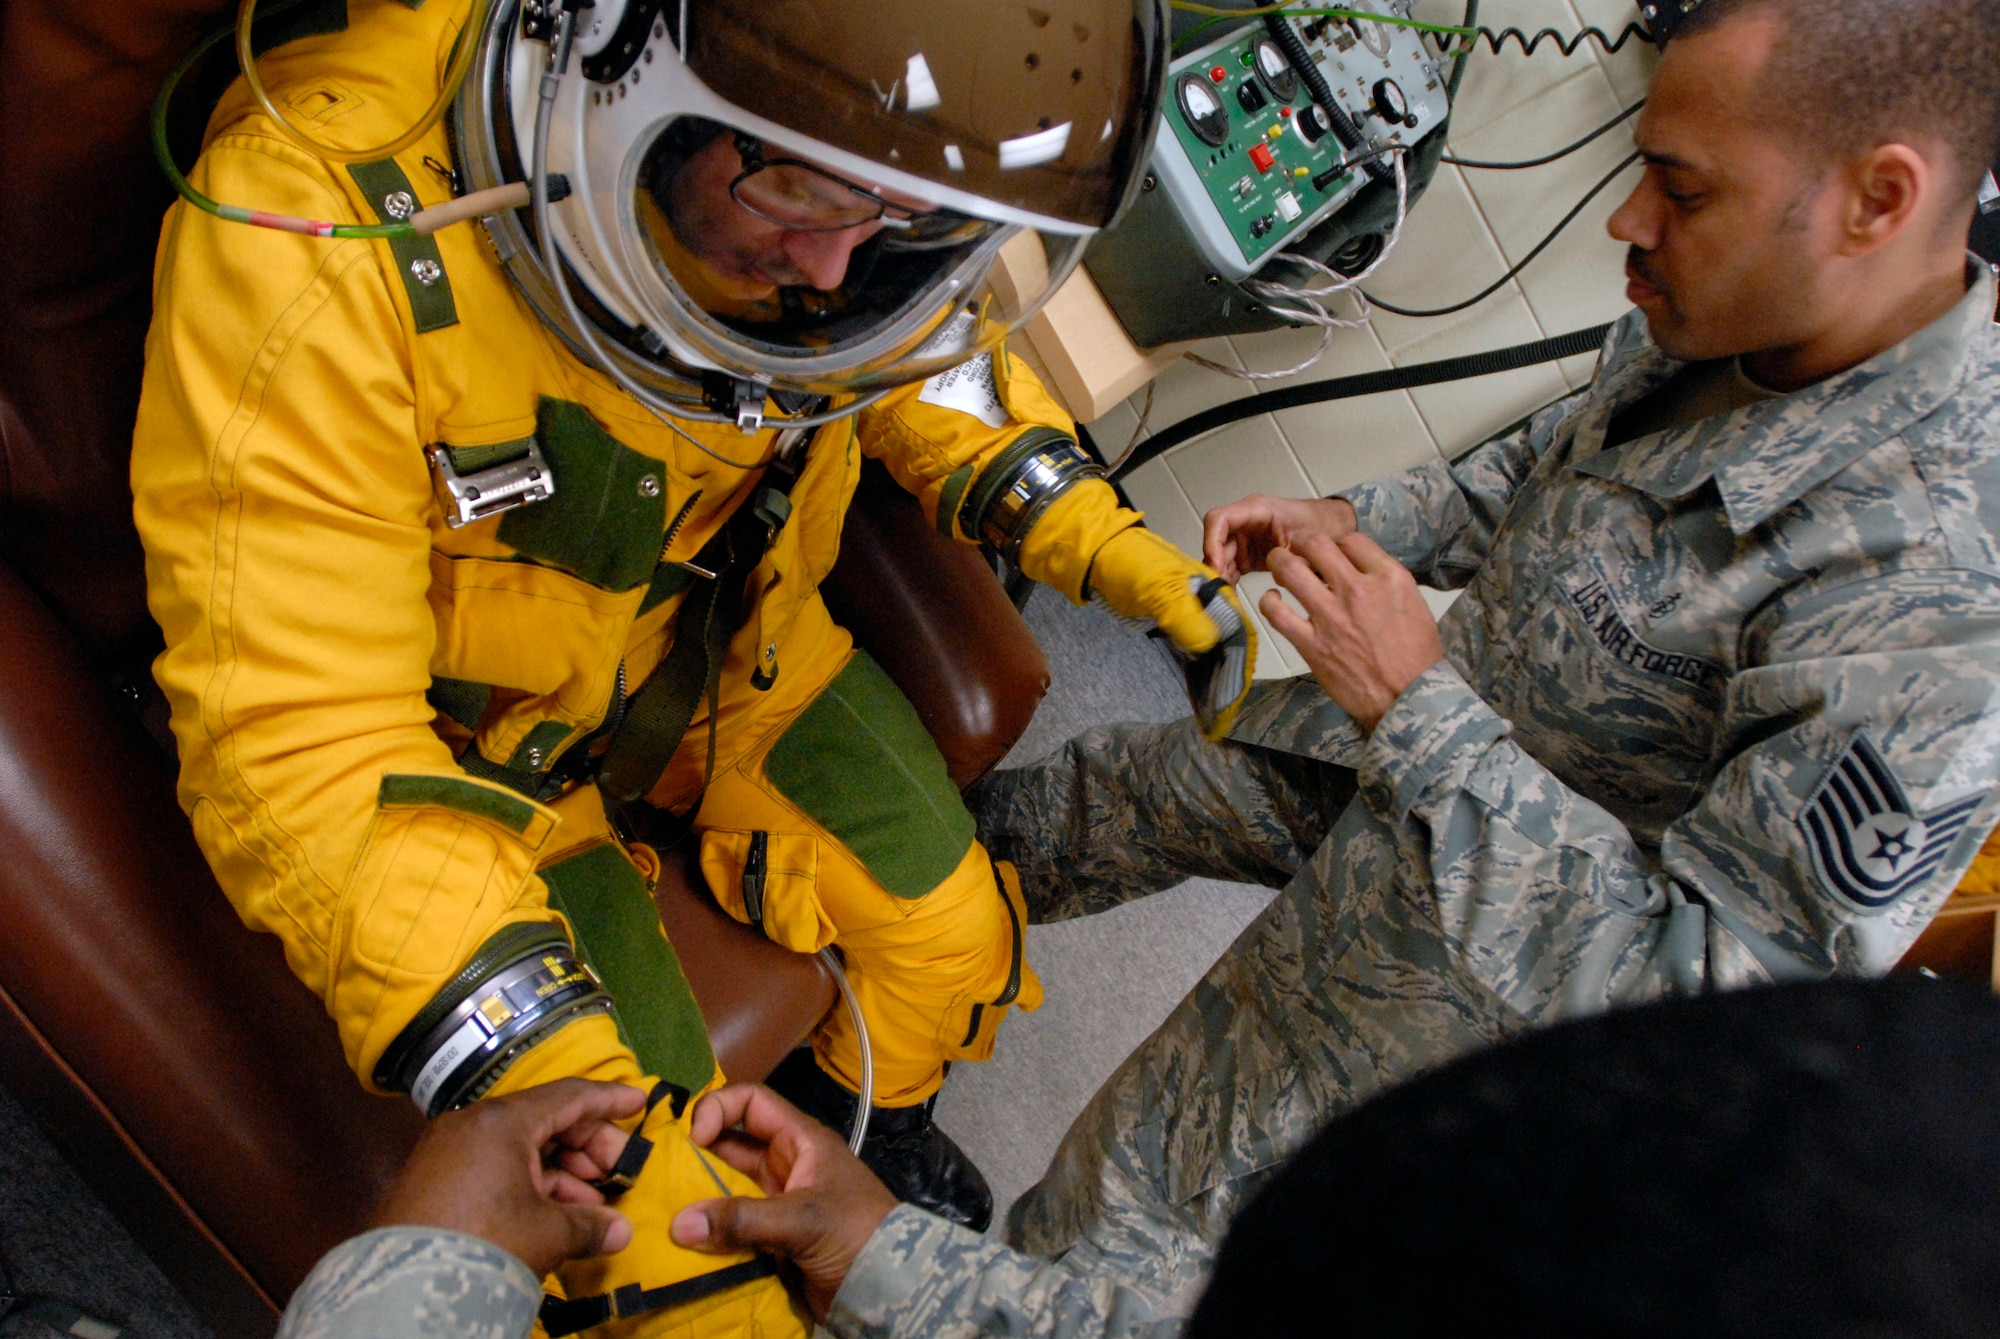 Tech. Sgt. Vontez Morrow, a physiology technician assigned to the 5th Reconnaissance Squadron, preps U-2 pilot Capt. Beau Block, also of the 5th Reconnaissance Squadron, for a humanitarian mission departing from Osan Air Base, Republic of Korea, March 13. The mission was flown to capture imagery of the earthquake- and tsunami-affected areas of Japan. (U.S. Air Force photo by Senior Master Sgt. Paul Holcomb)